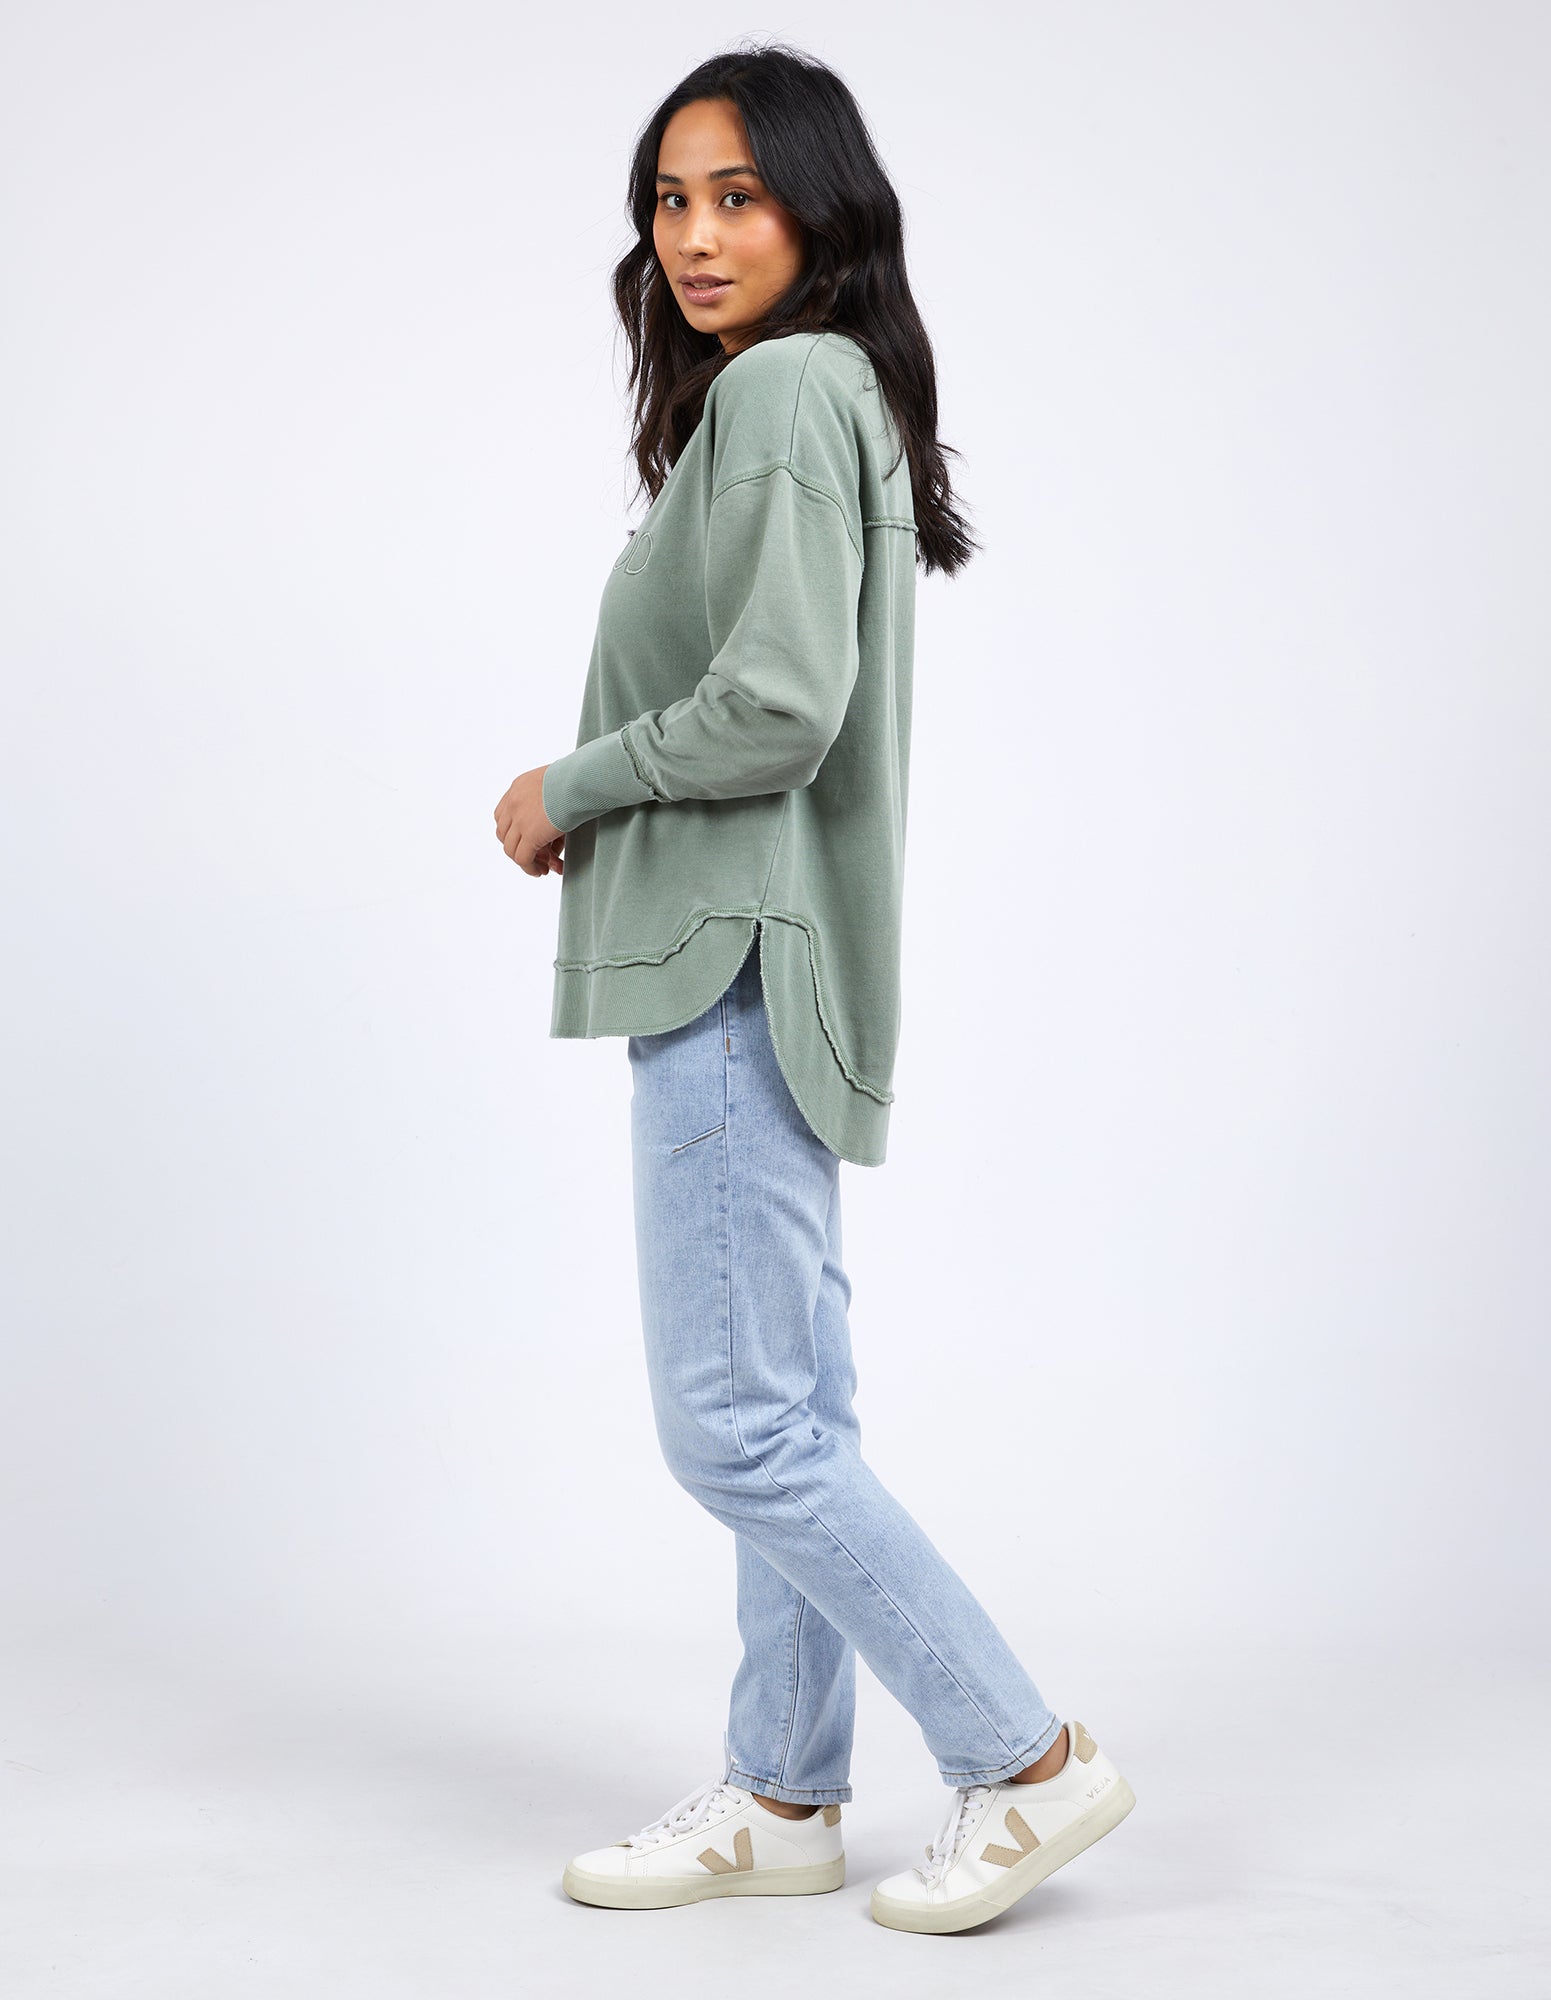 FOXWOOD SIMPLIFIED CREW - SAGE - THE VOGUE STORE